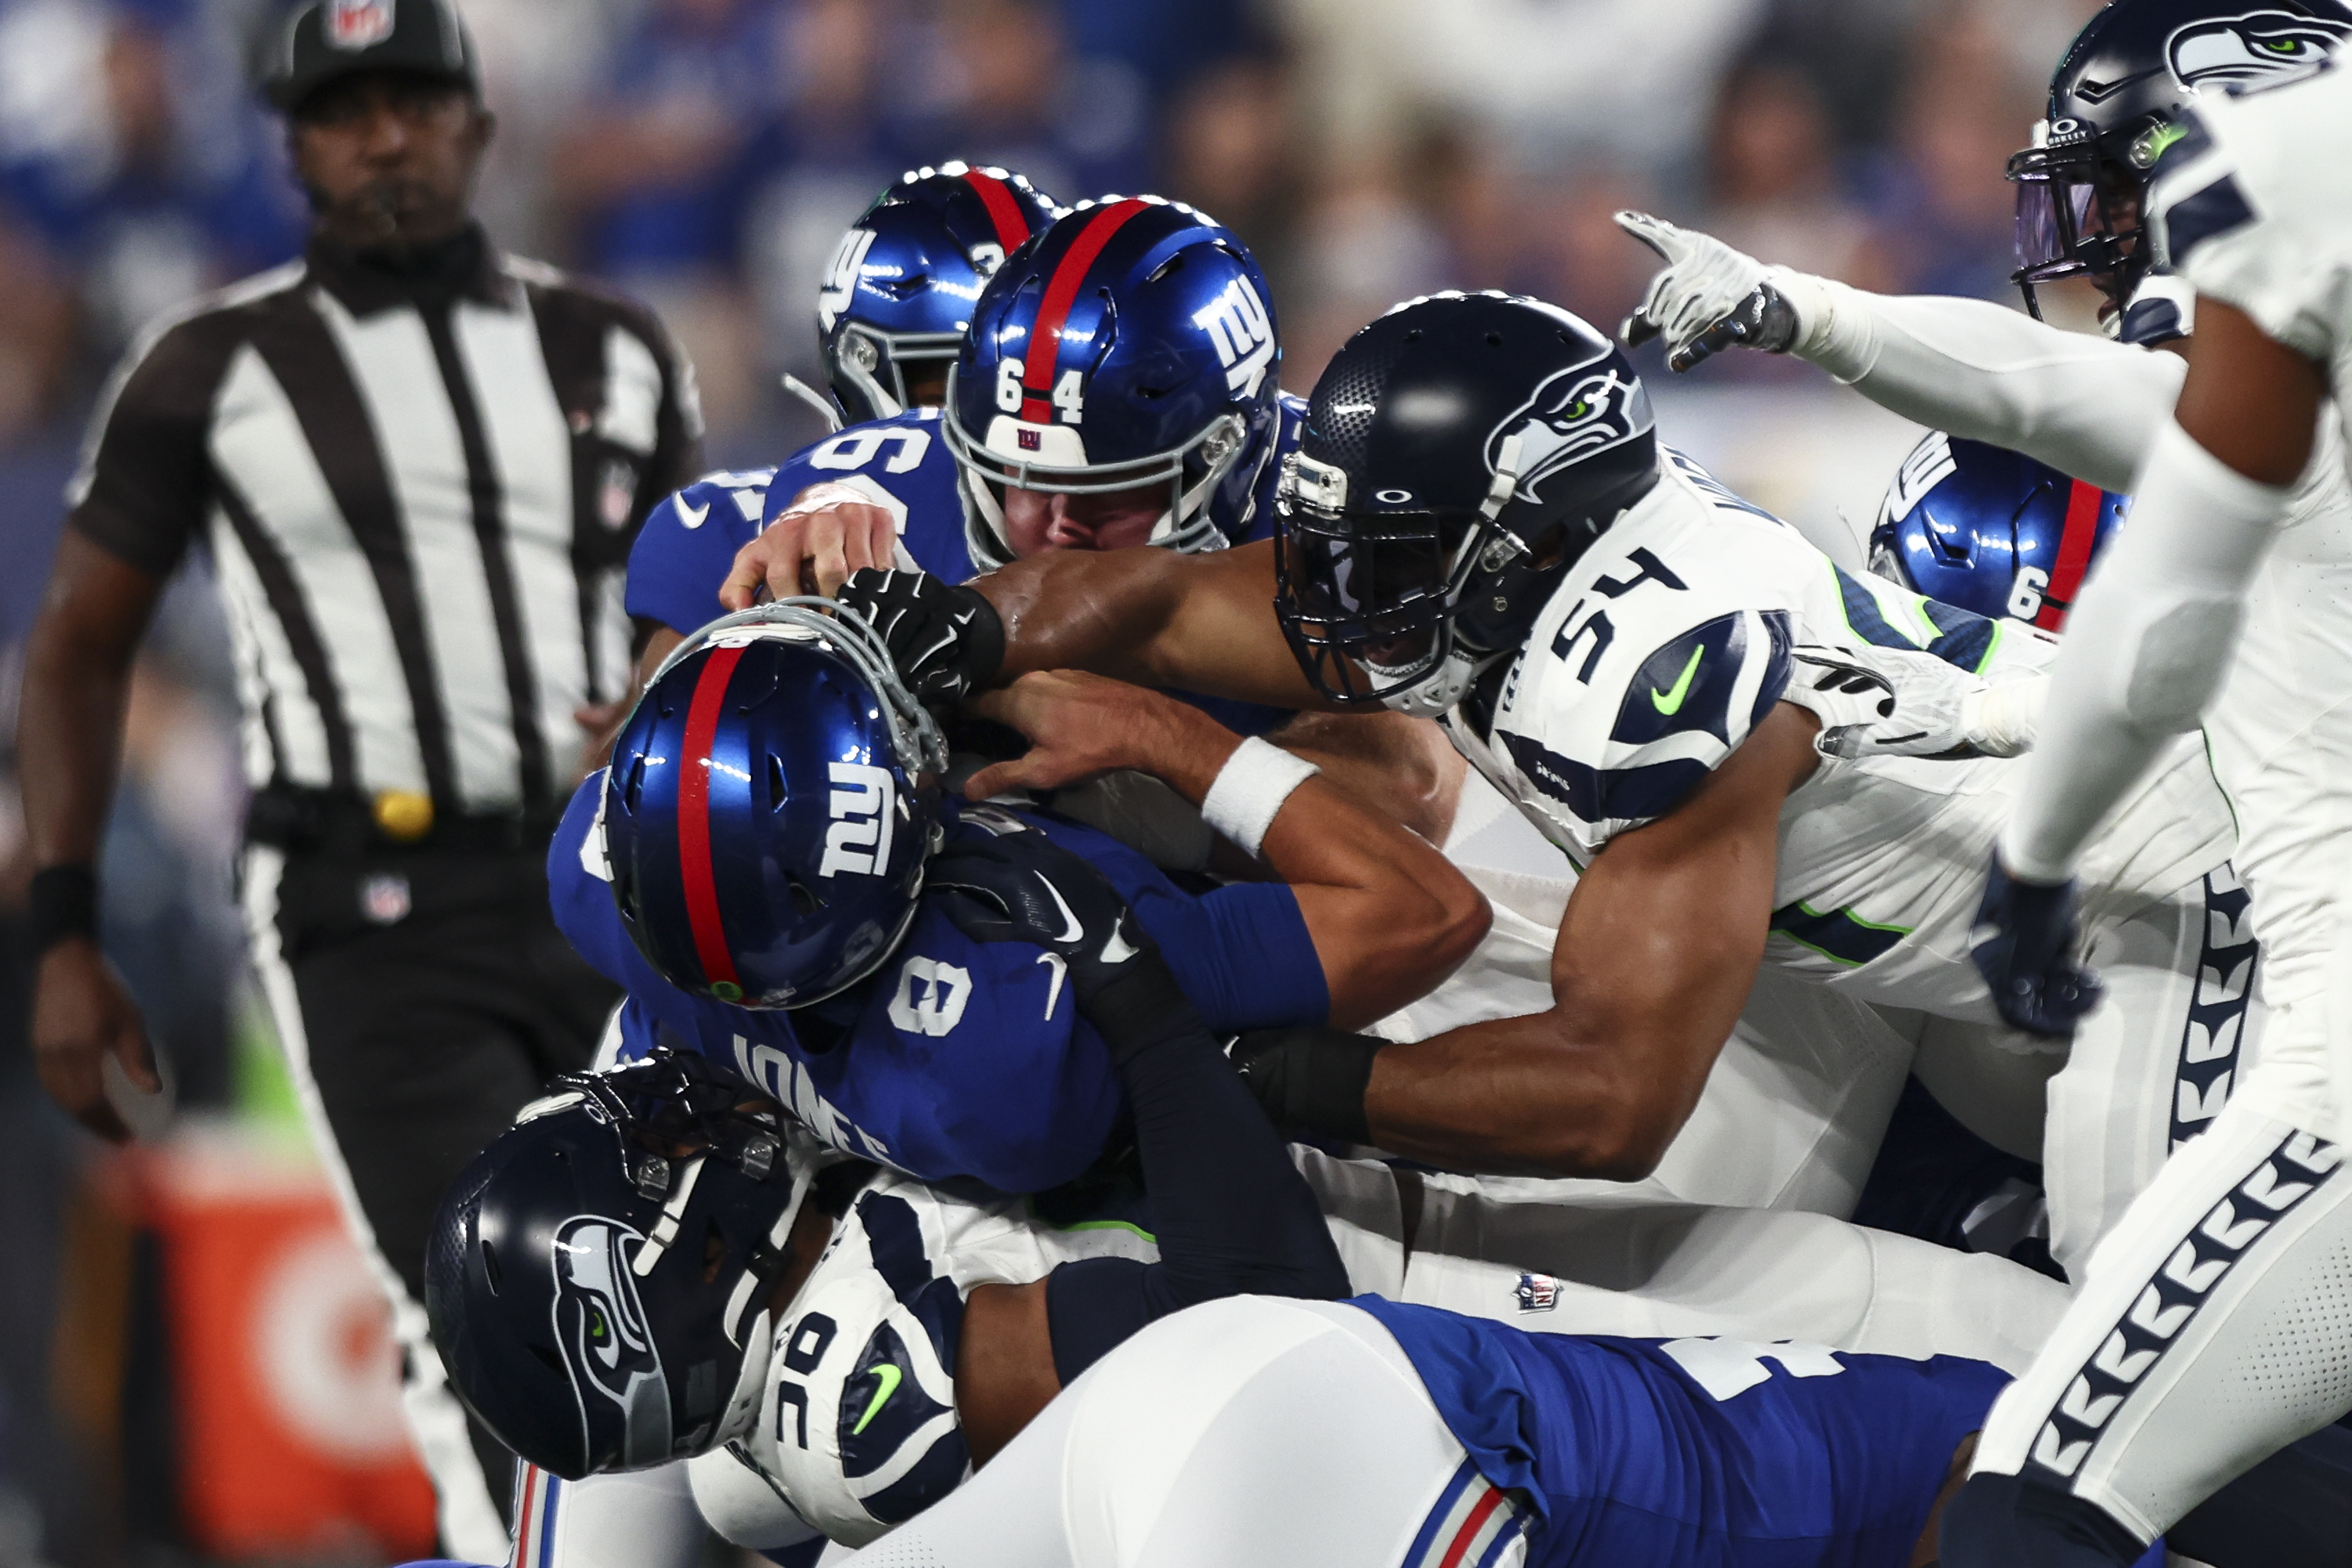 How to watch Giants vs. Seahawks on Monday Night Football